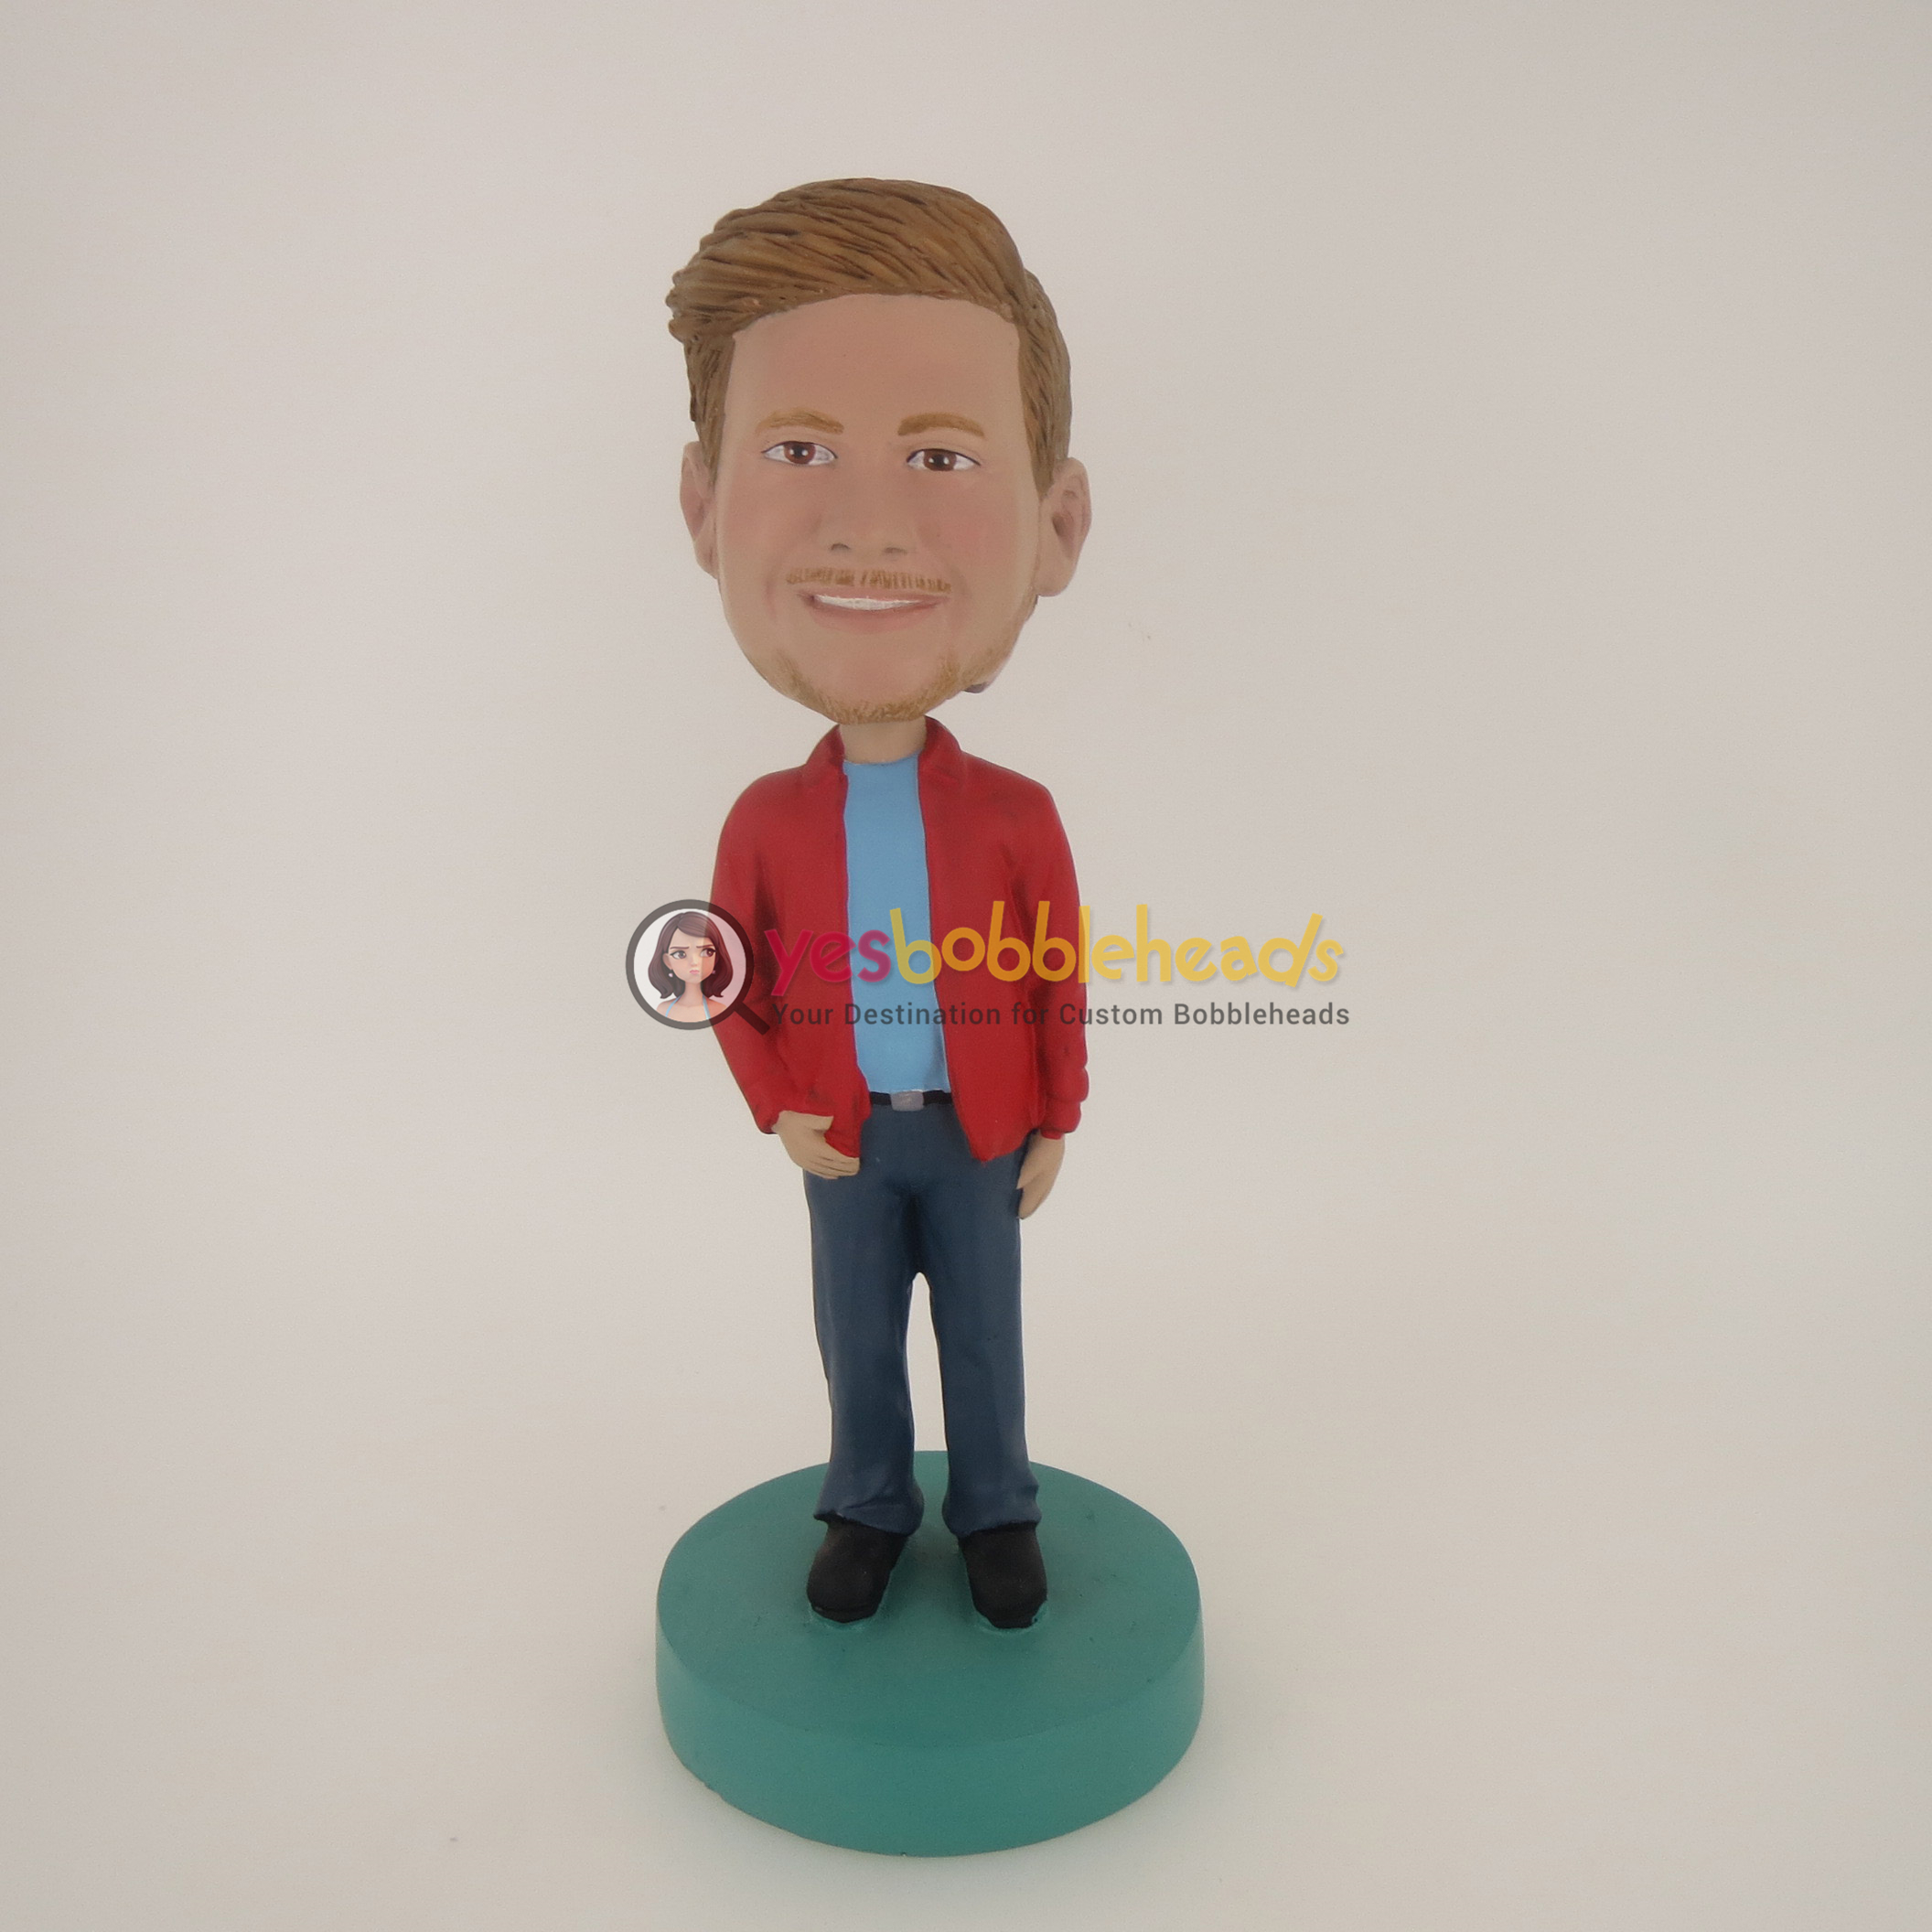 Picture of Custom Bobblehead Doll: Casual Man In Red Jacket